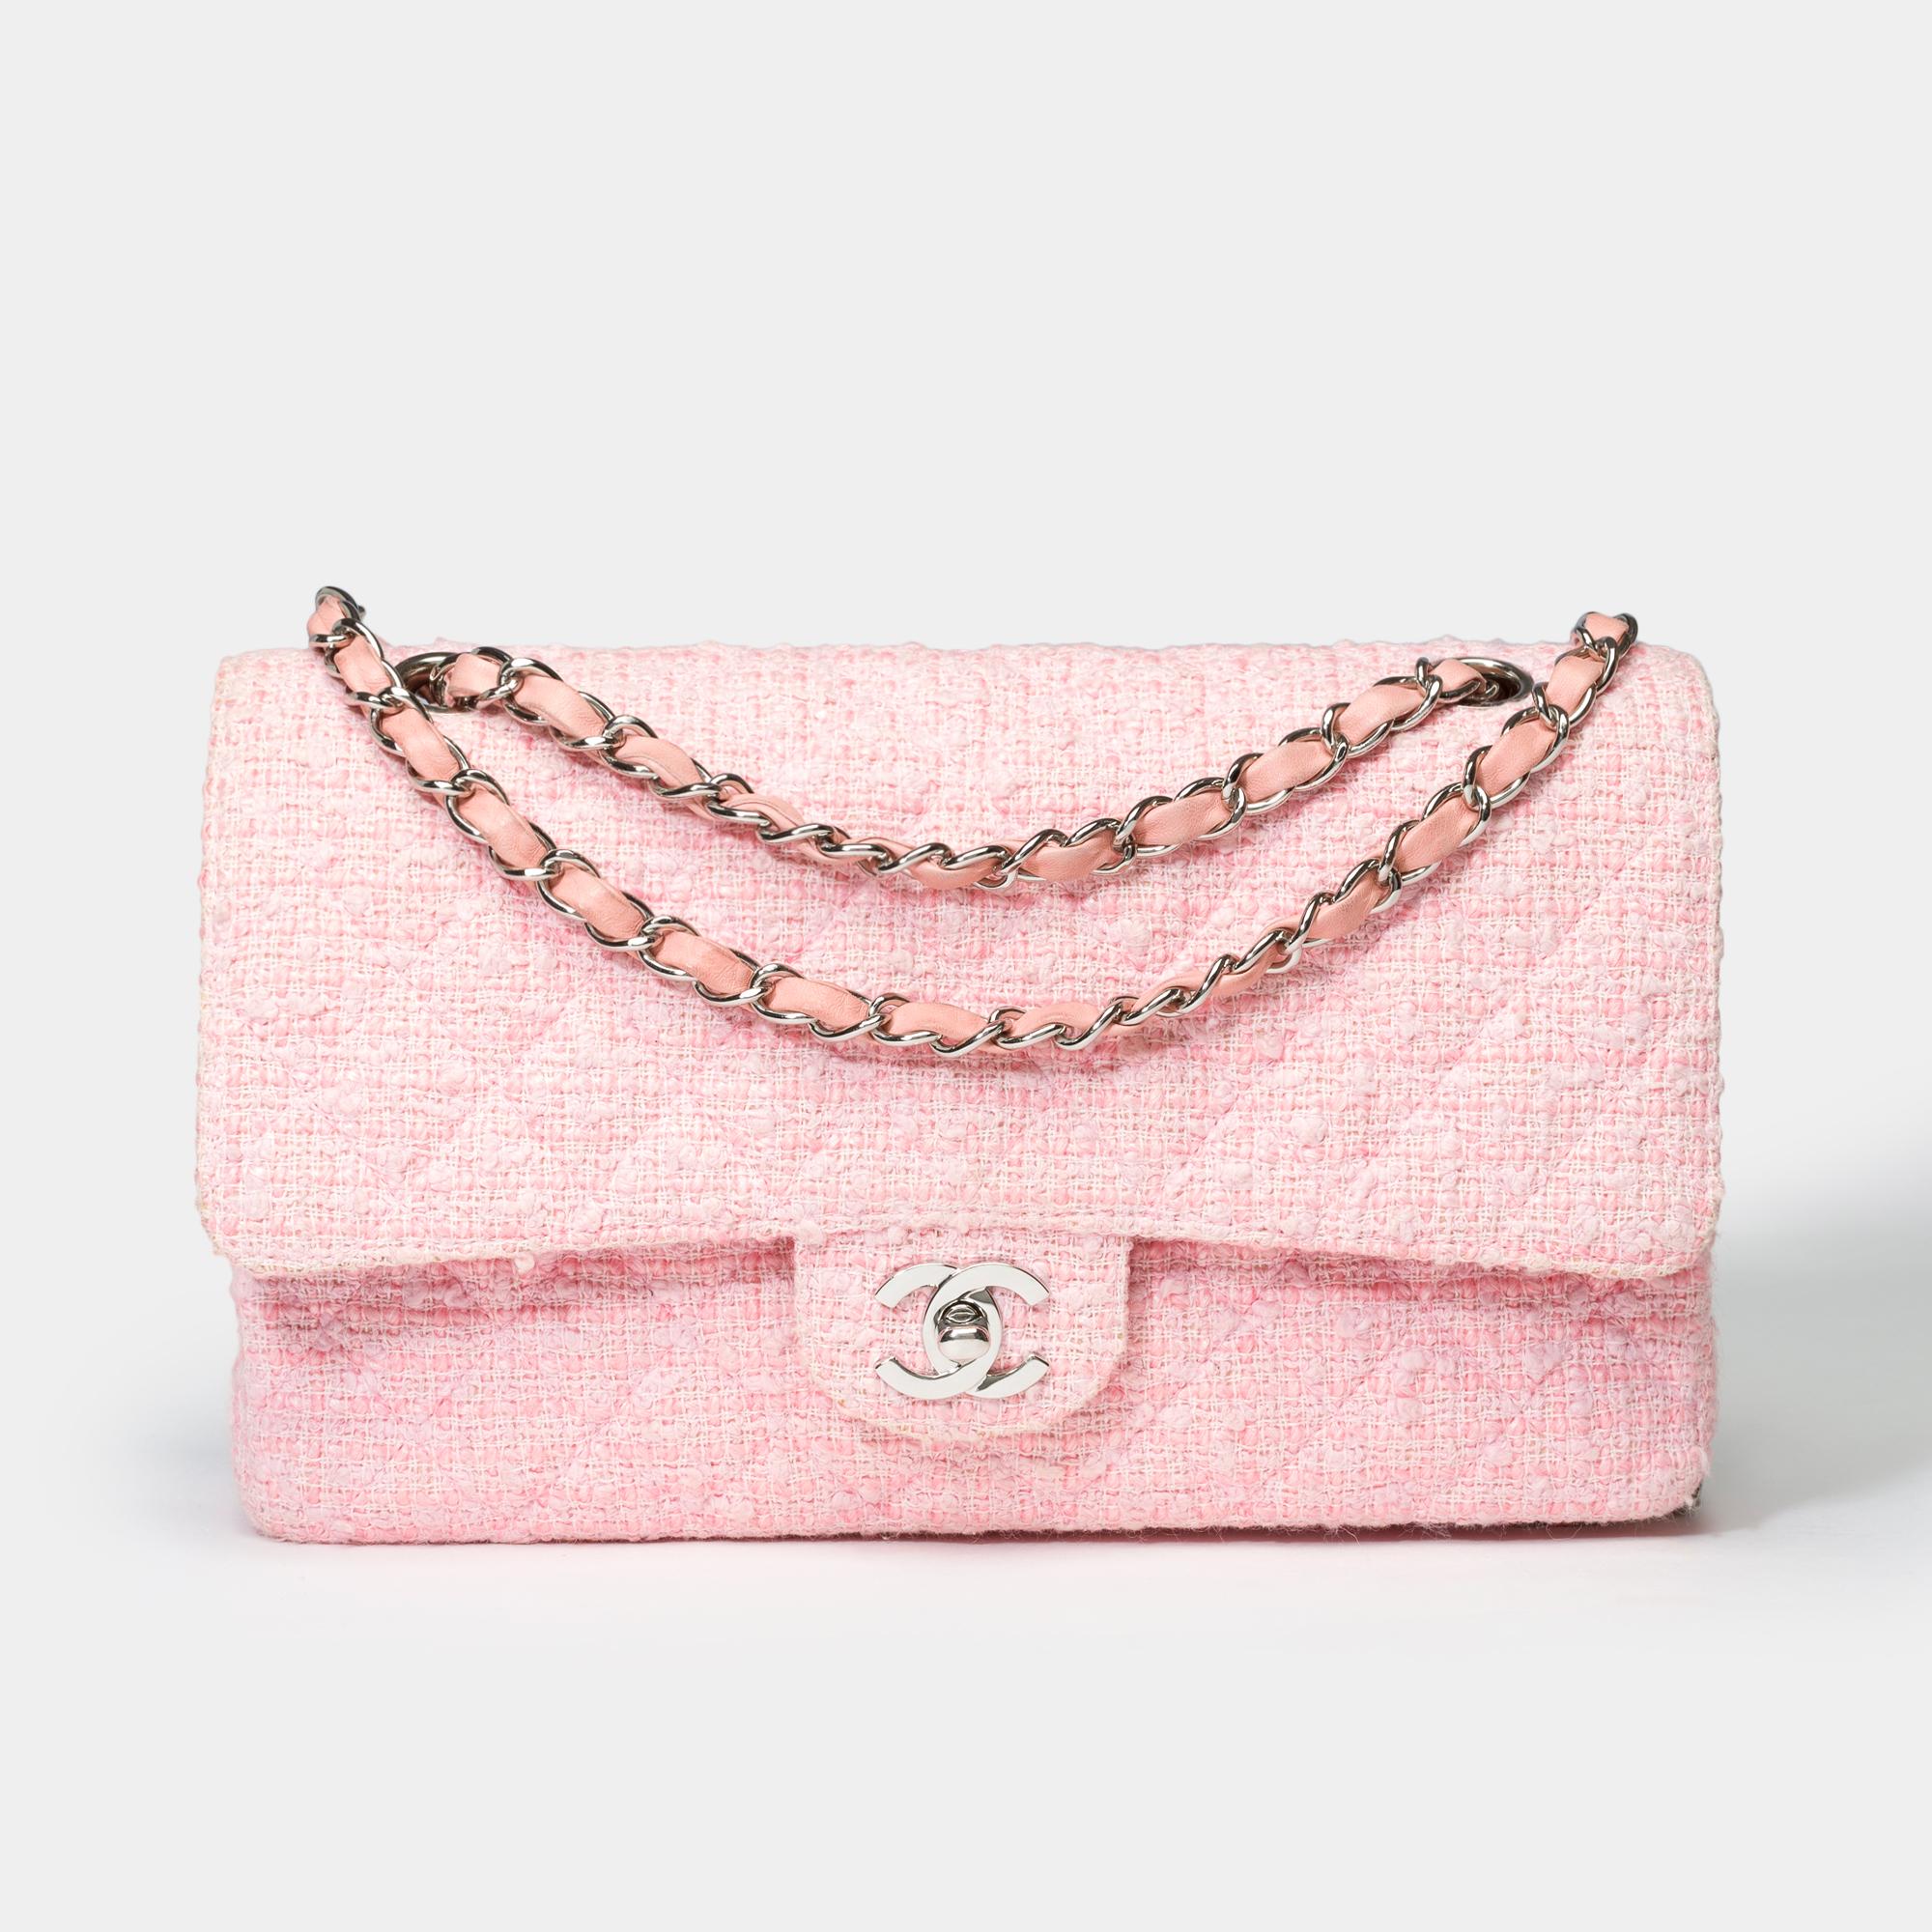 Exceptional​​ ​​and​​ ​​Rare​​ ​​Timeless/Classic​​ ​​double​​ ​​flap​​ ​​shoulder​​ ​​bag​​ ​​in​​ ​​pink​​ ​​quilted​​ ​​Tweed,​​ ​​champagne​​ ​​metal​​ ​​hardware,​​ ​​champagne​​ ​​metal​​ ​​handle​​ ​​interlaced​​ ​​with​​ ​​pink​​ ​​leather​​